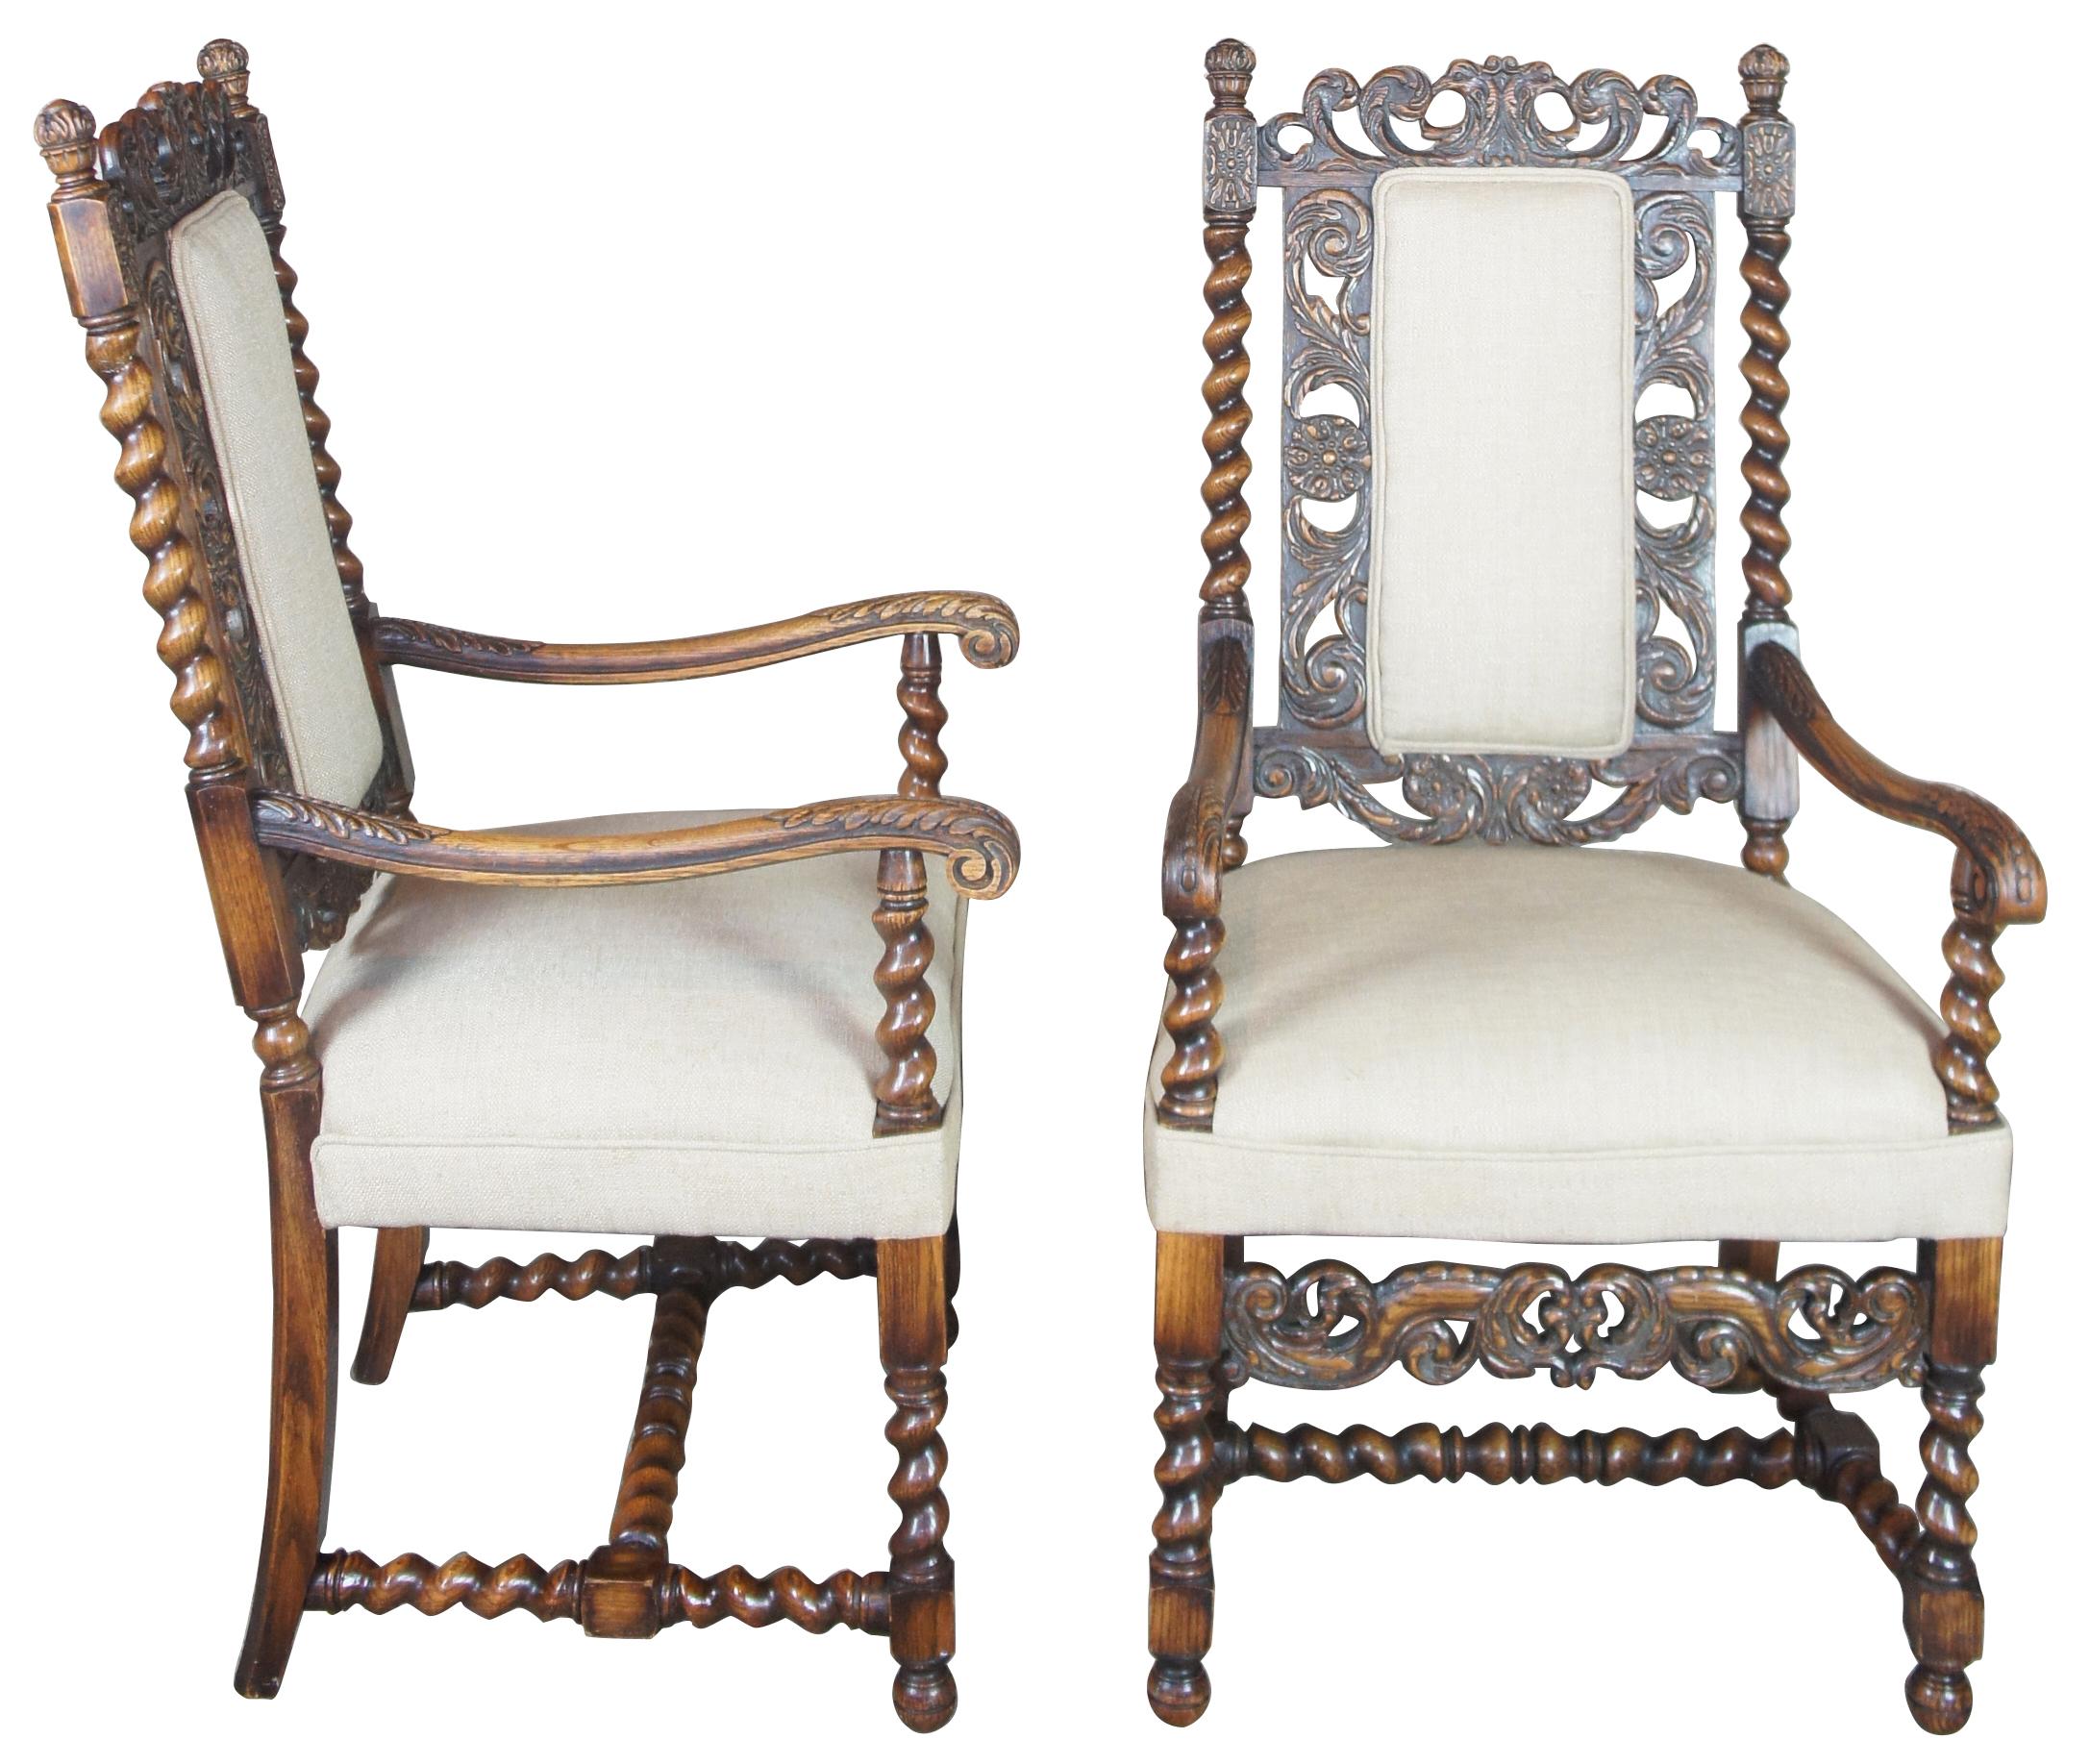 2 antique French Renaissance Revival carved oak hunt arm chairs barley twist

Two 19th century French Renaissance Revival armchairs. Made from oak with heavily carved front and back. Features acanthus and barley twist design as well as two figural